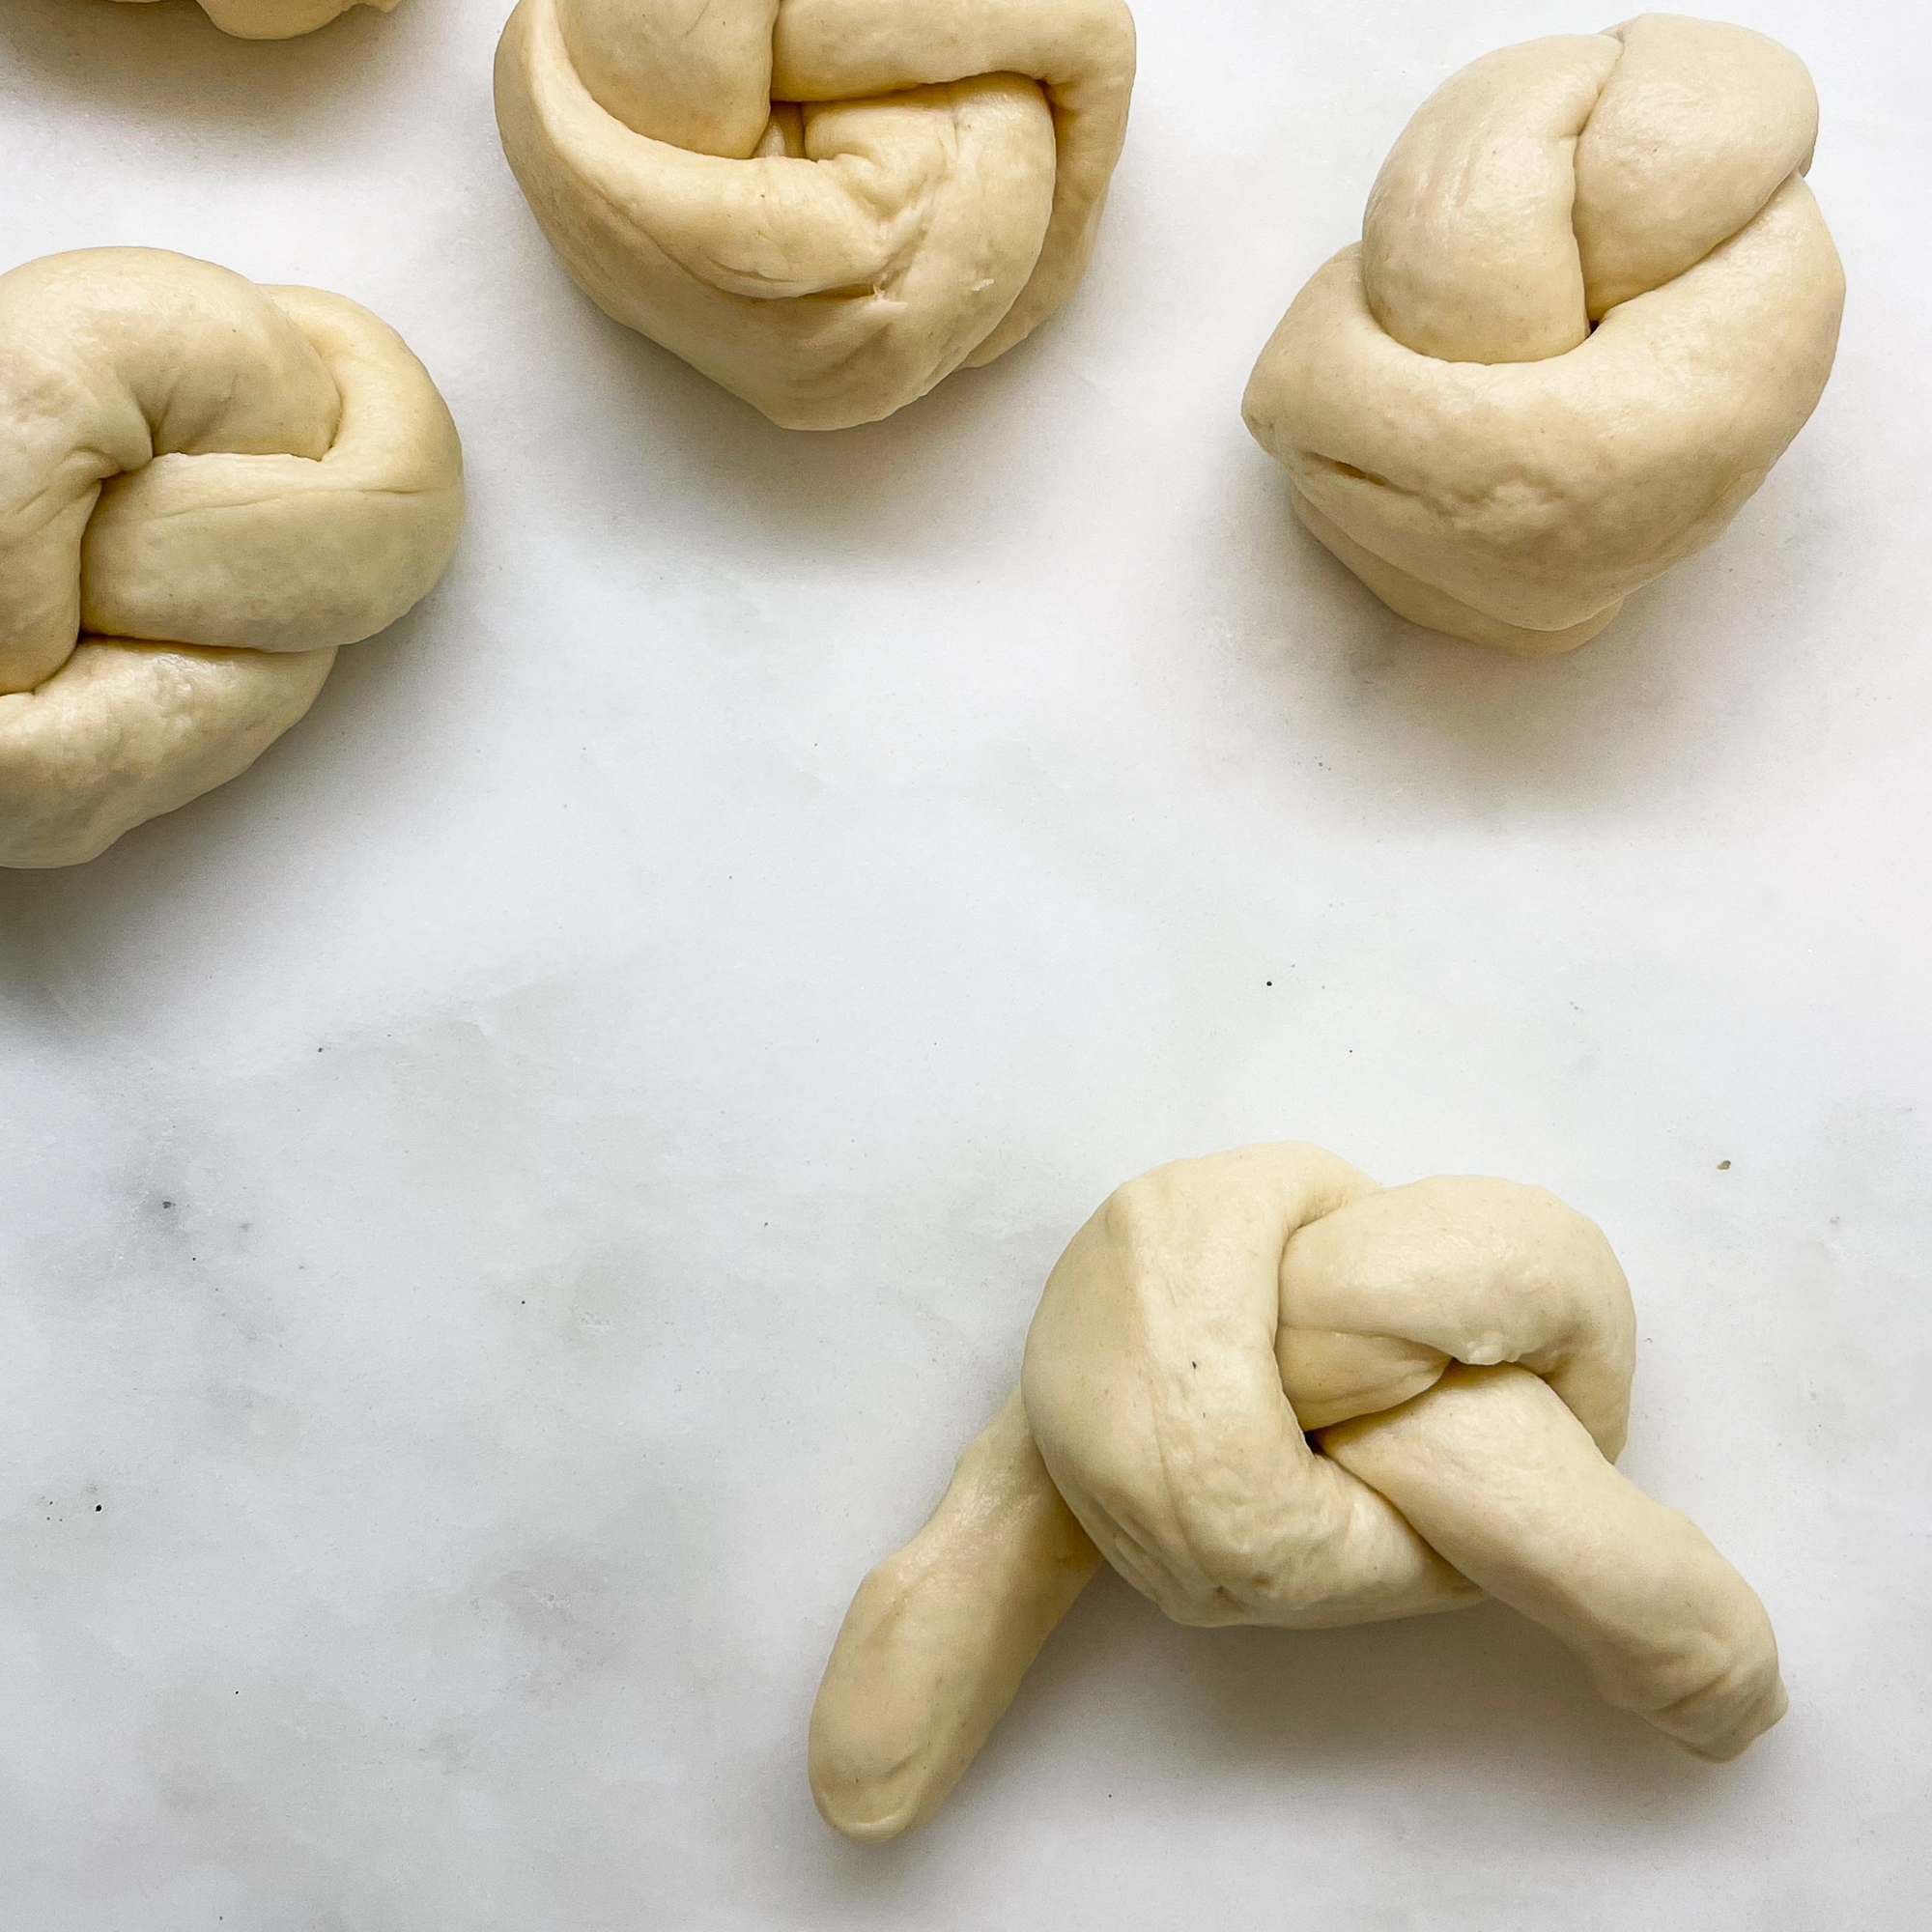 three sourdough discard garlic knots in background with a rope of dough shaped into a knot with the ends hanging to the sides